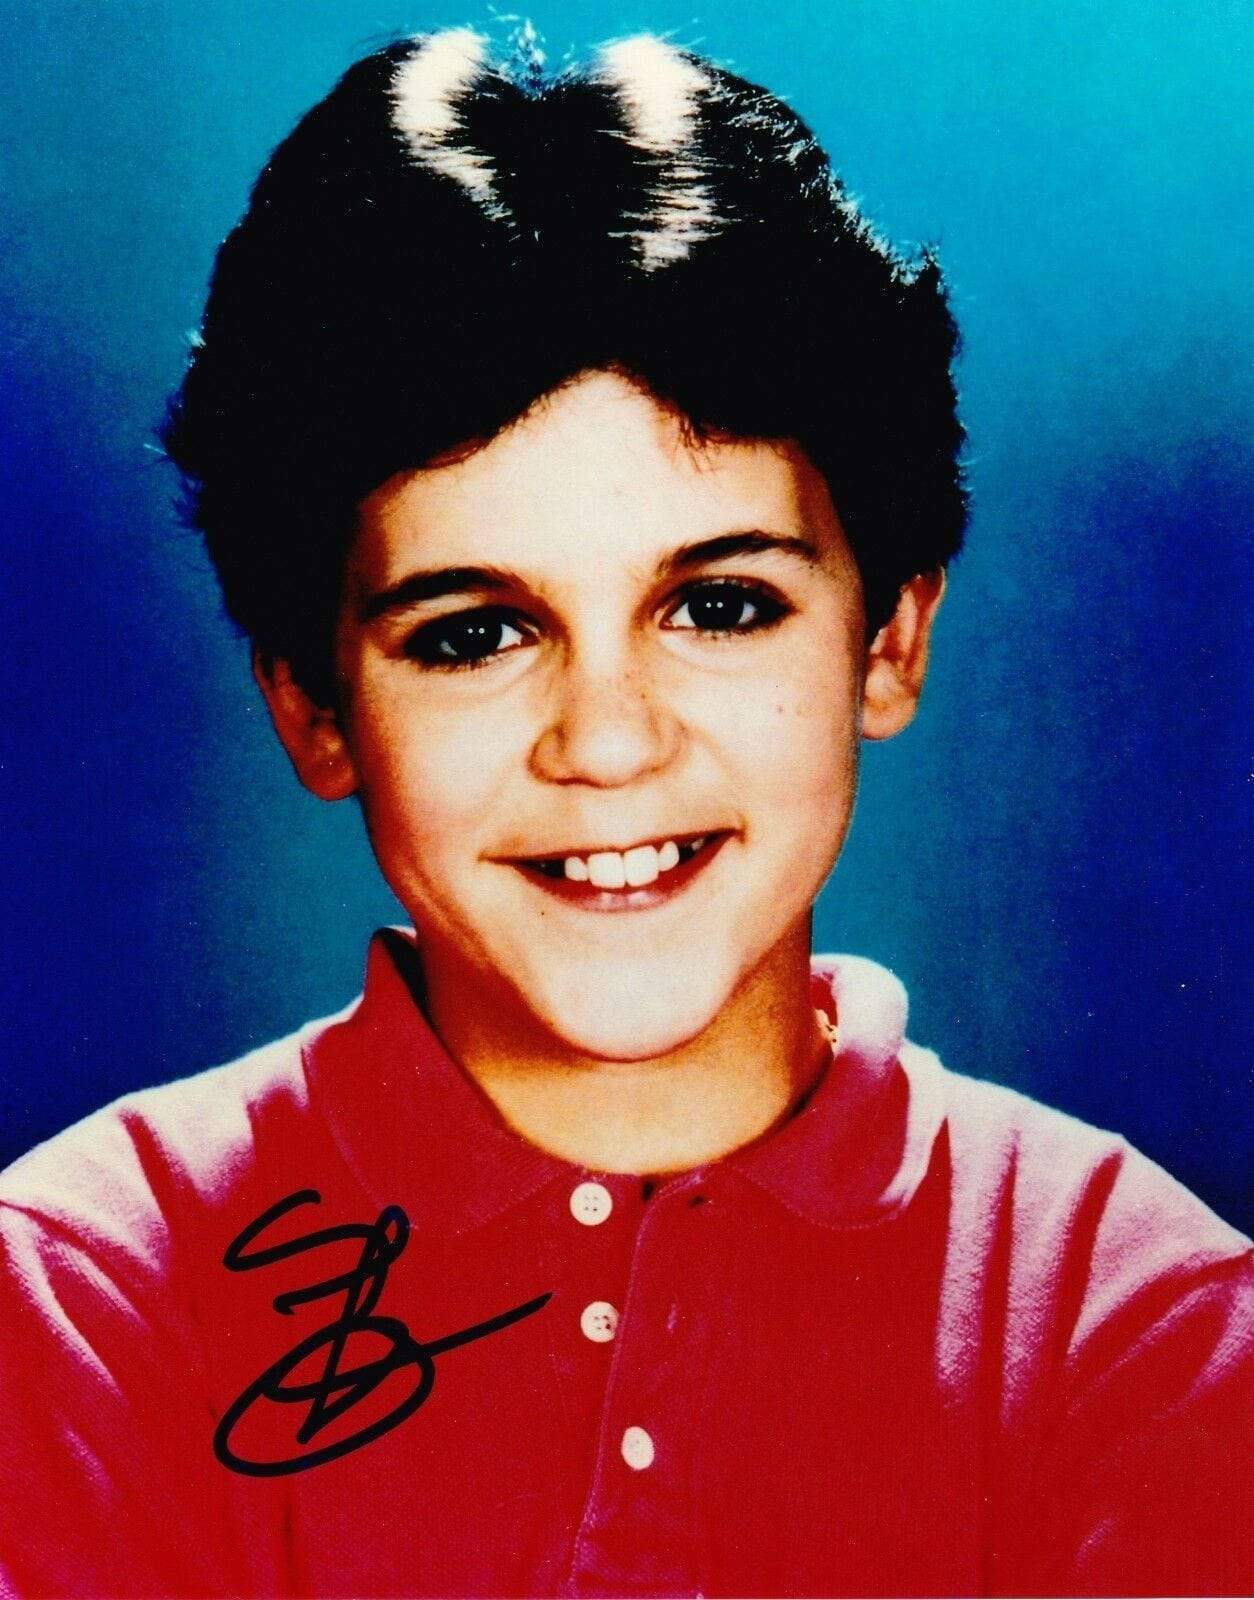 Fred Savage Authentic Autographed 8x10 Photo - Prime Time Signatures - TV & Film